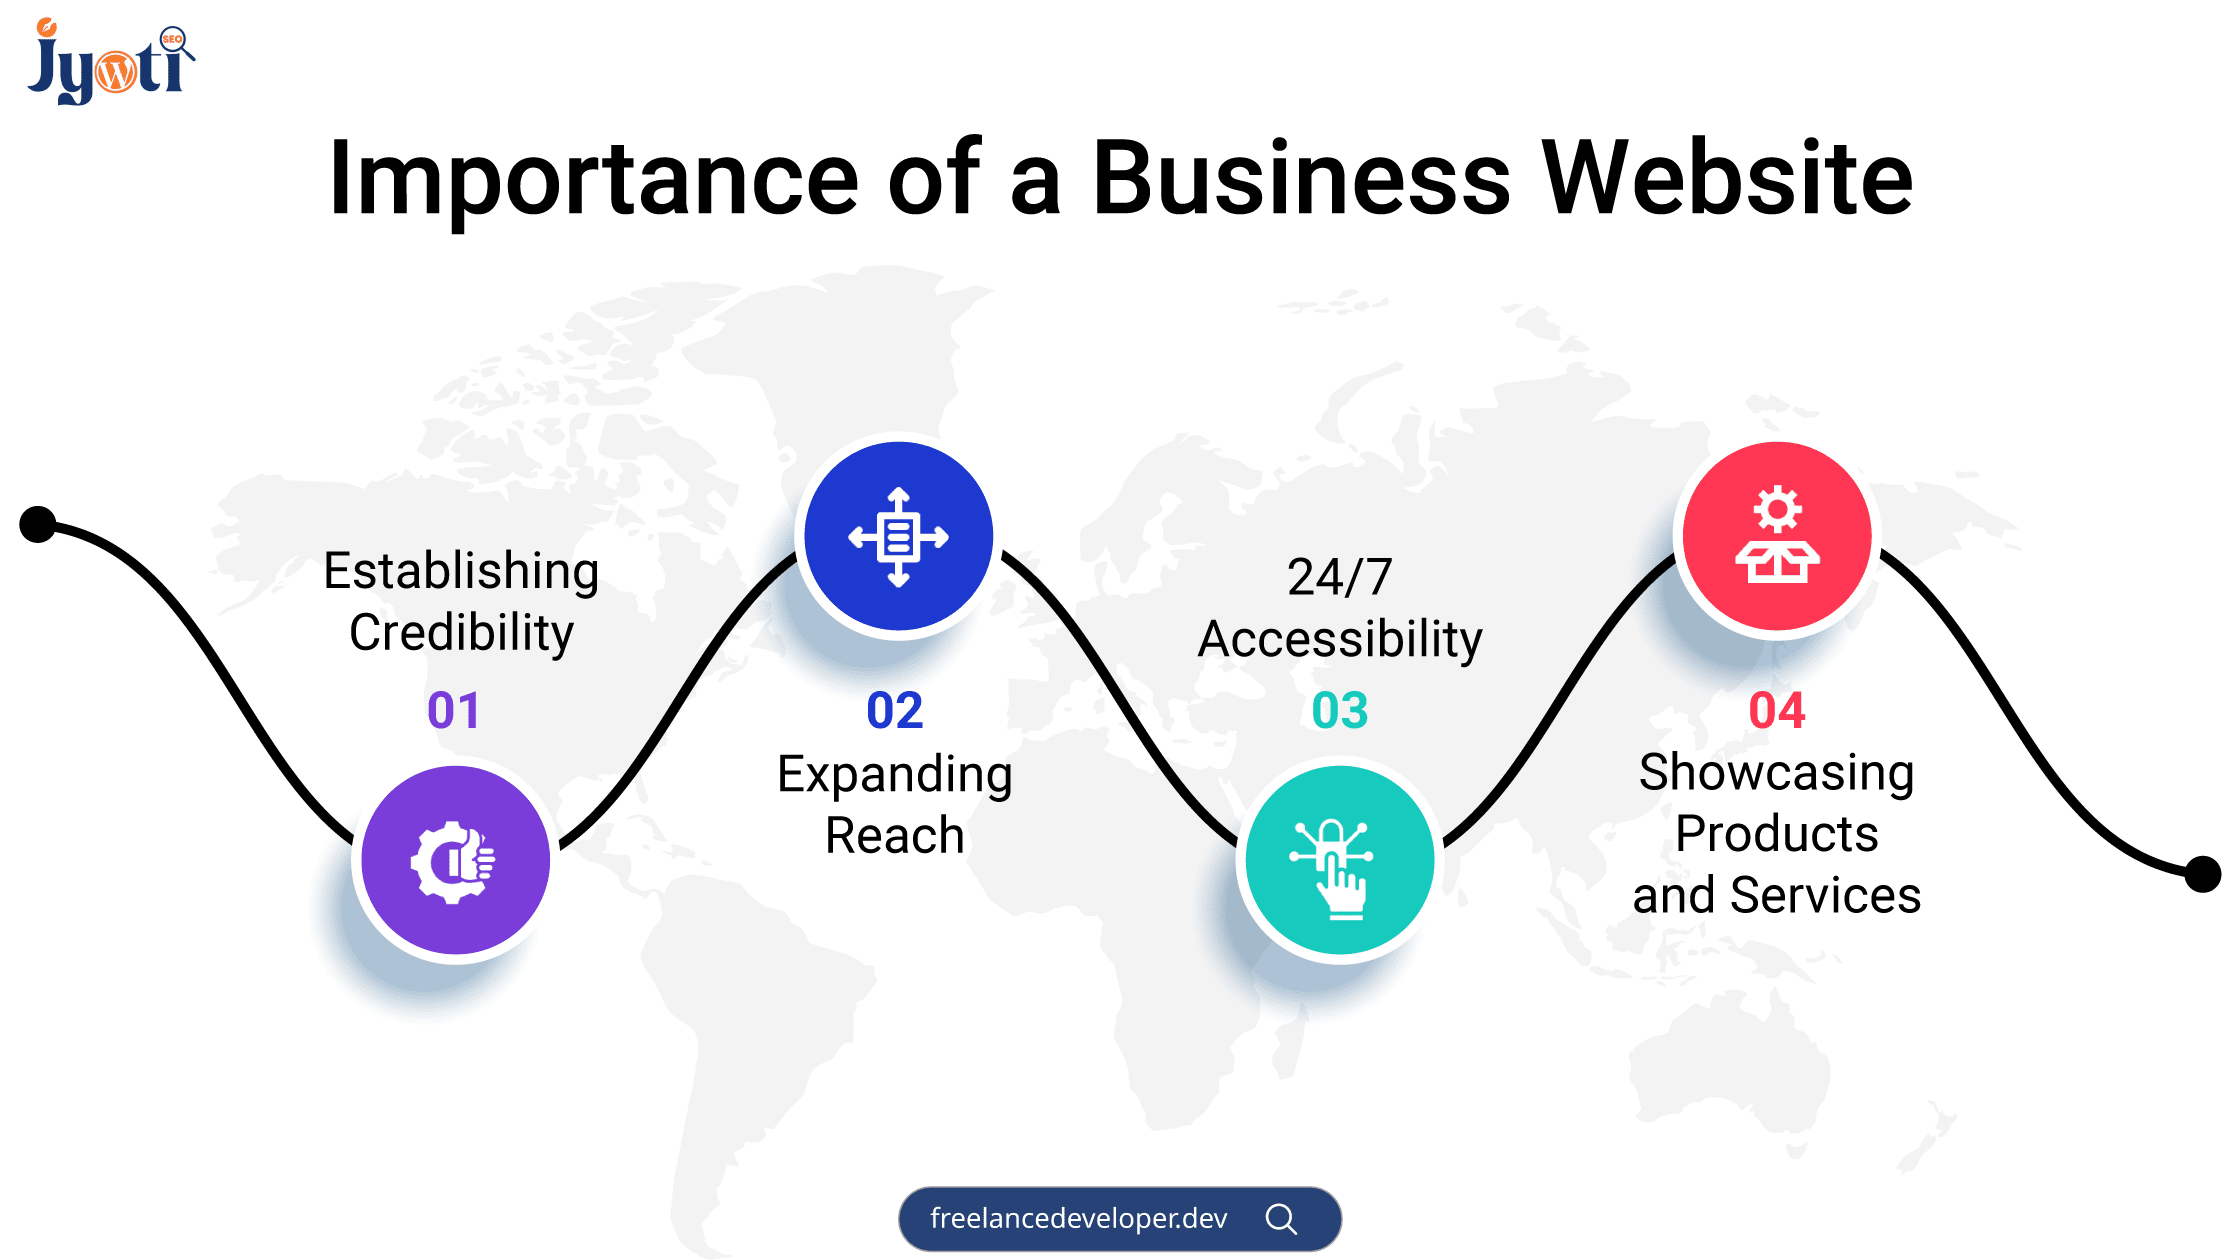 Importance of a Business Website